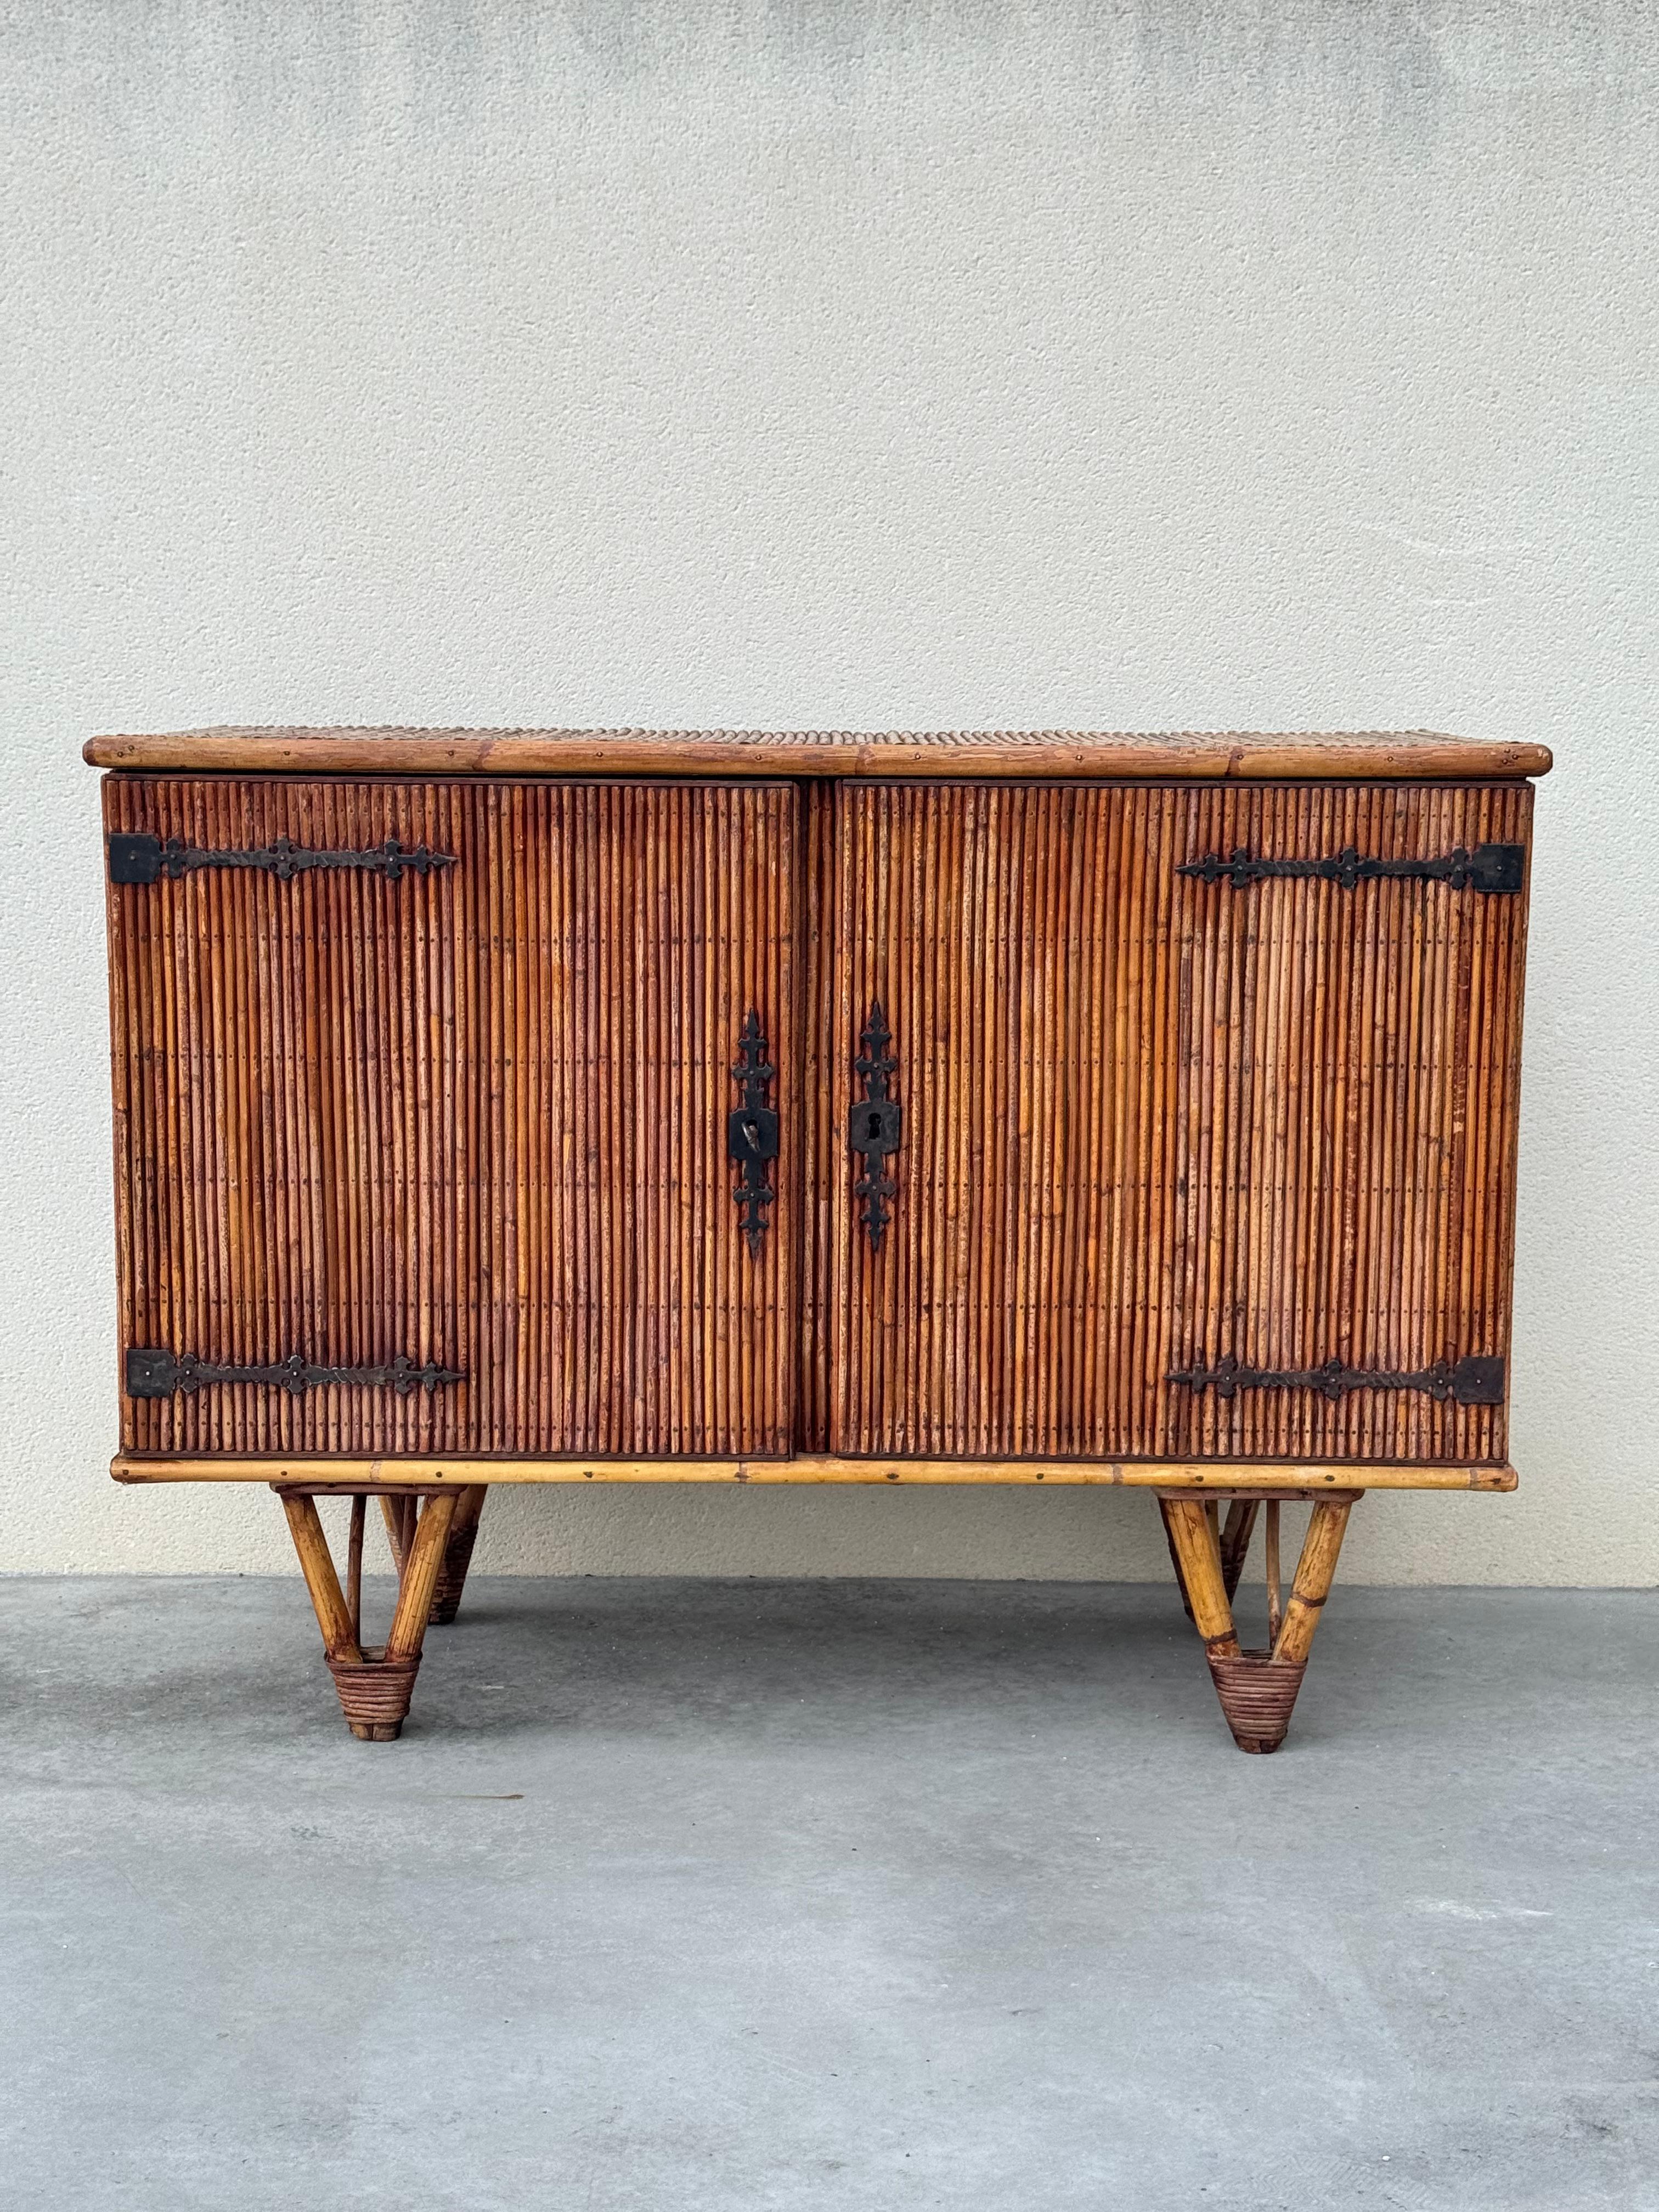 Beautiful rattan bamboo sideboard by Adrien Audoux and Frida Minet . 

Two-door cabinet with intricate wrought iron hinges with original key, two interior shelf. 
Thick bamboo legs with wrapped rattan detail. 

Original finish shows varying shades